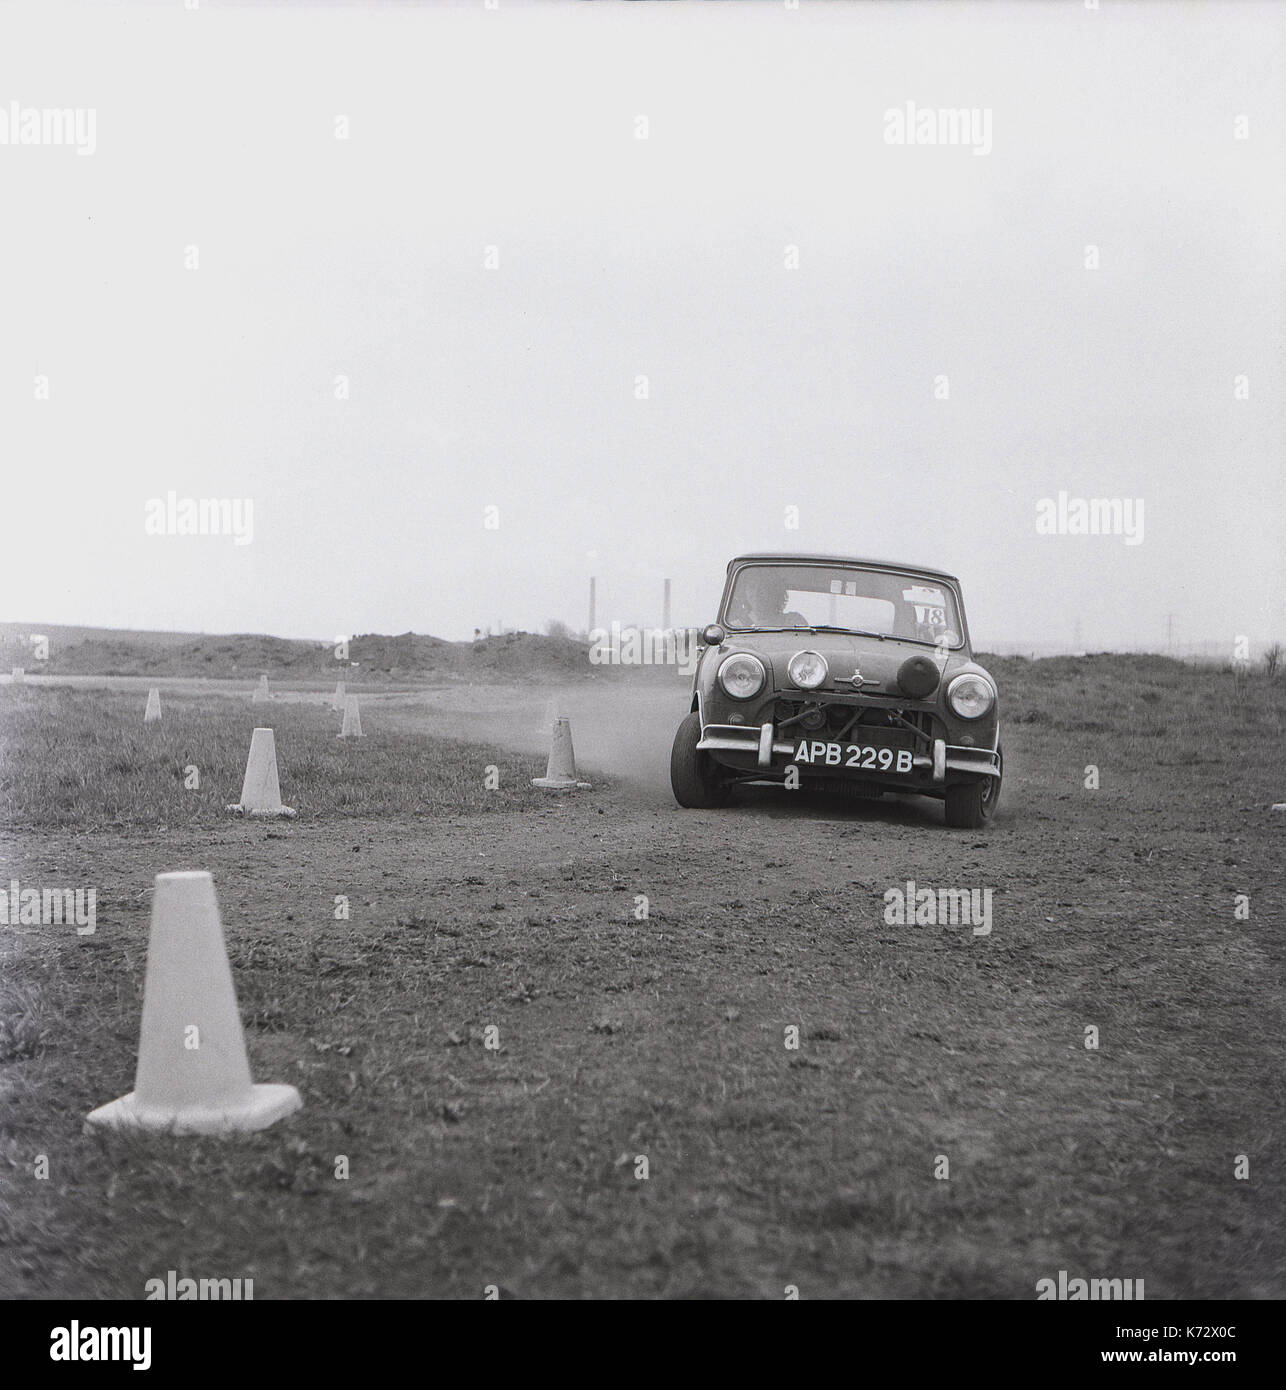 1970s, historical, a specially modified works mini taking a corner at speed while racing on a gravel test track with cones marking the course, England. Stock Photo